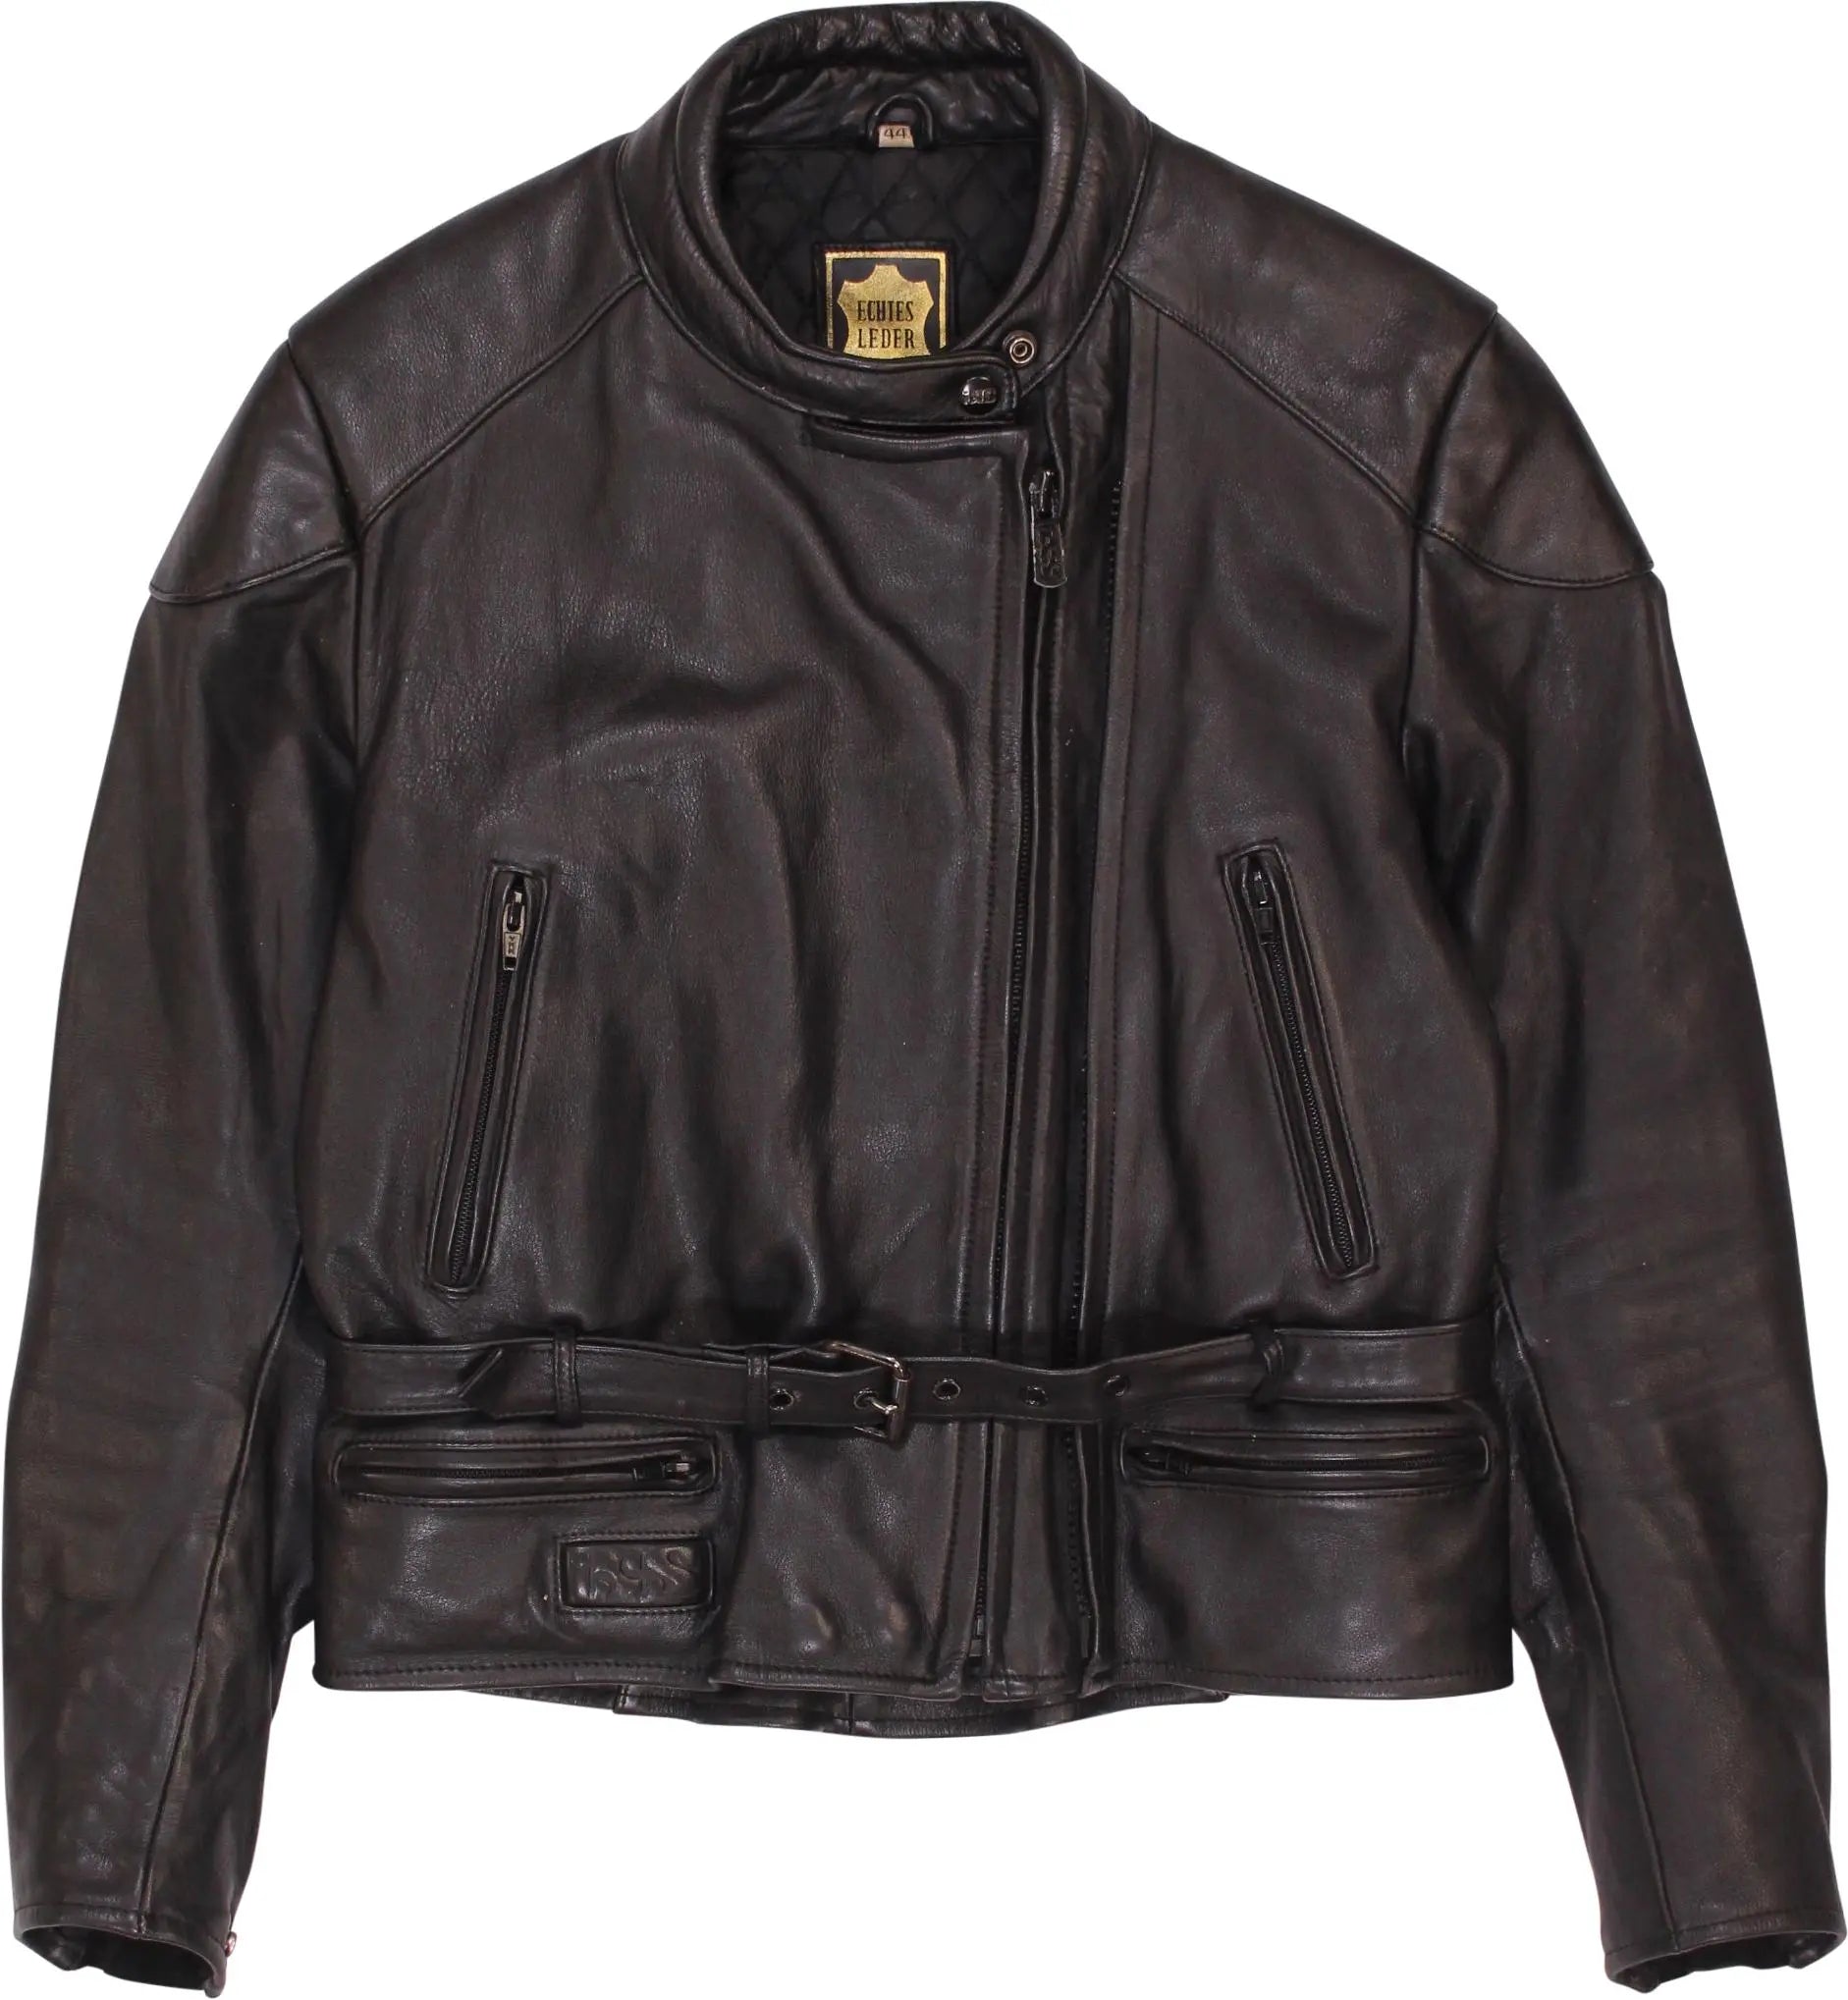 IXS - Vintage IXS Leather Jacket- ThriftTale.com - Vintage and second handclothing